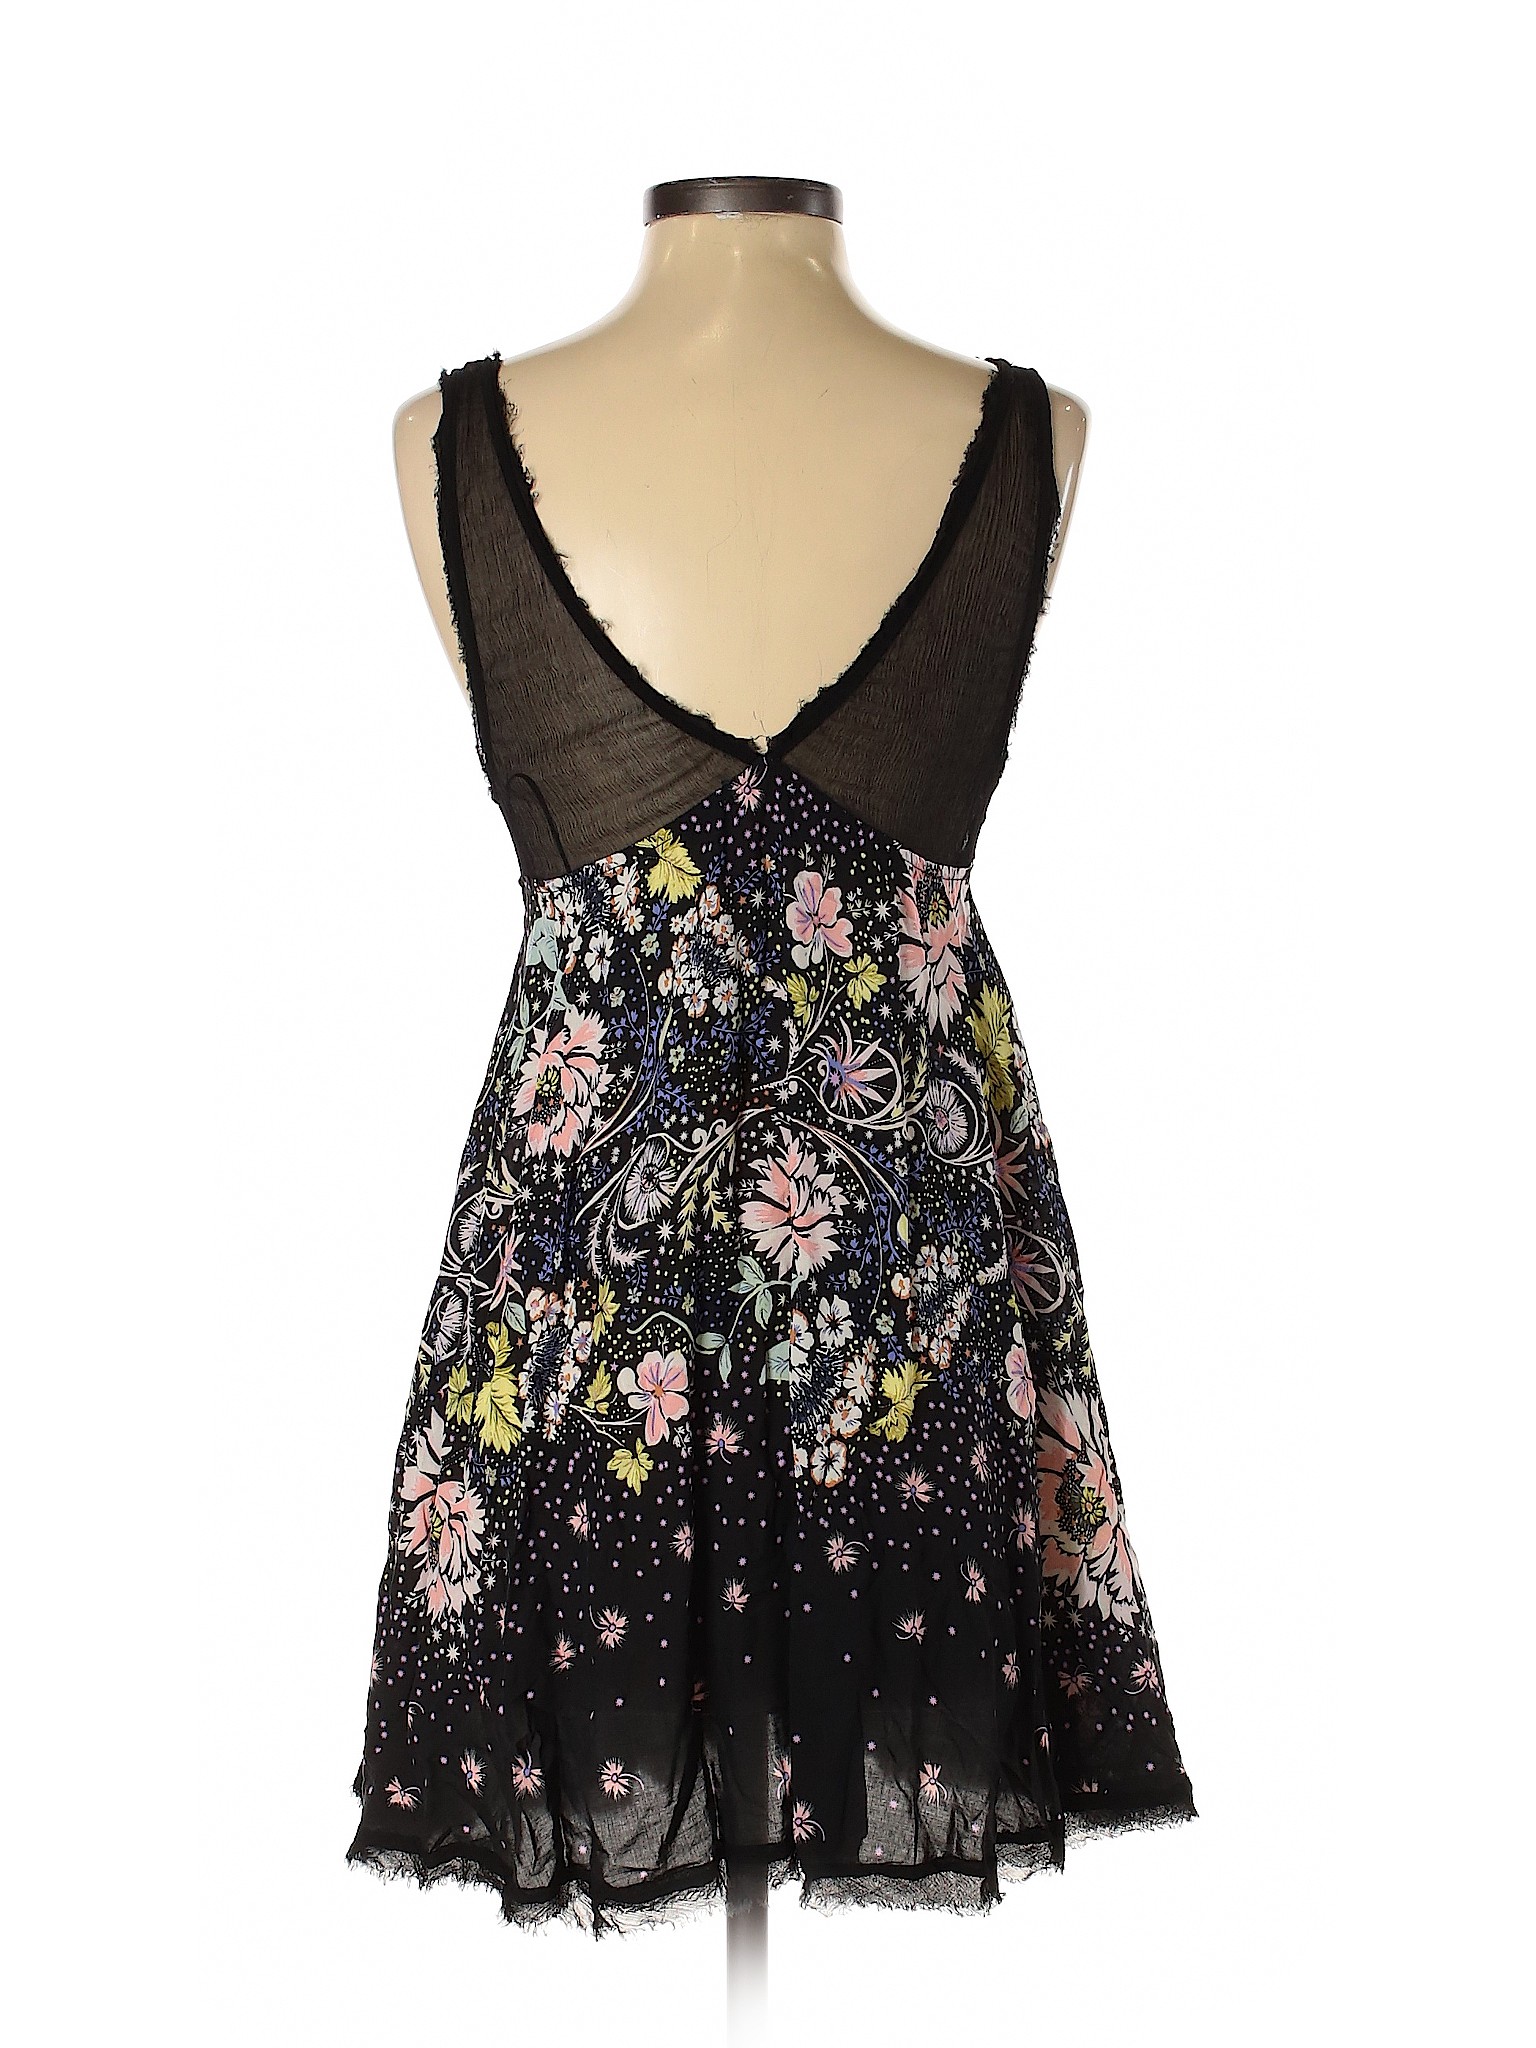 Sonoma Goods for Life 100% Rayon Floral Multi Color Black Casual Dress Size  XXL - 52% off